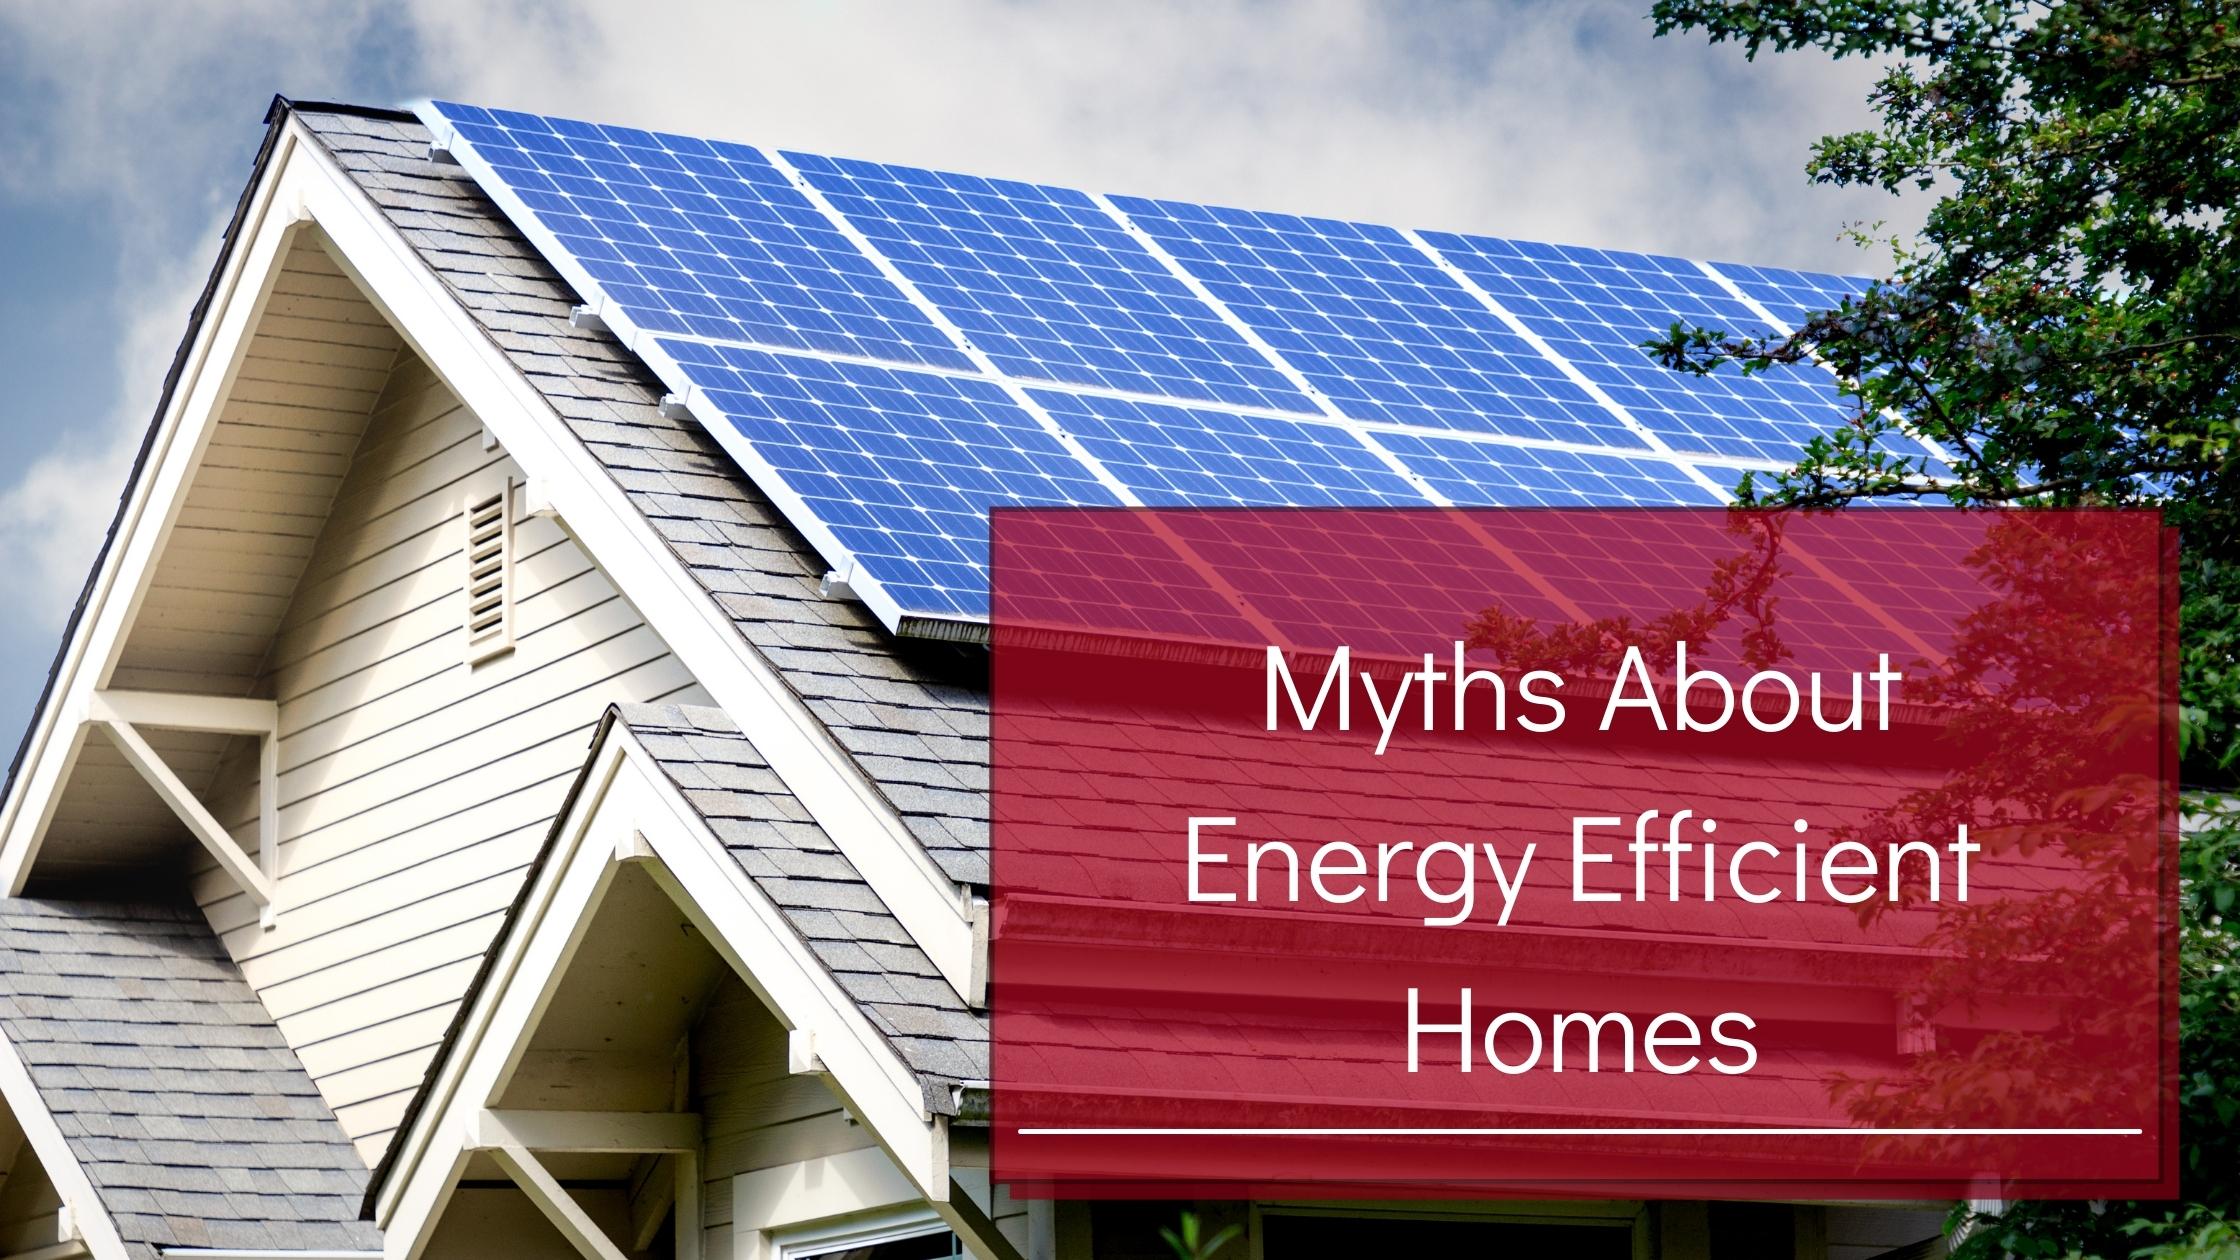 Myths About Energy Efficient Homes